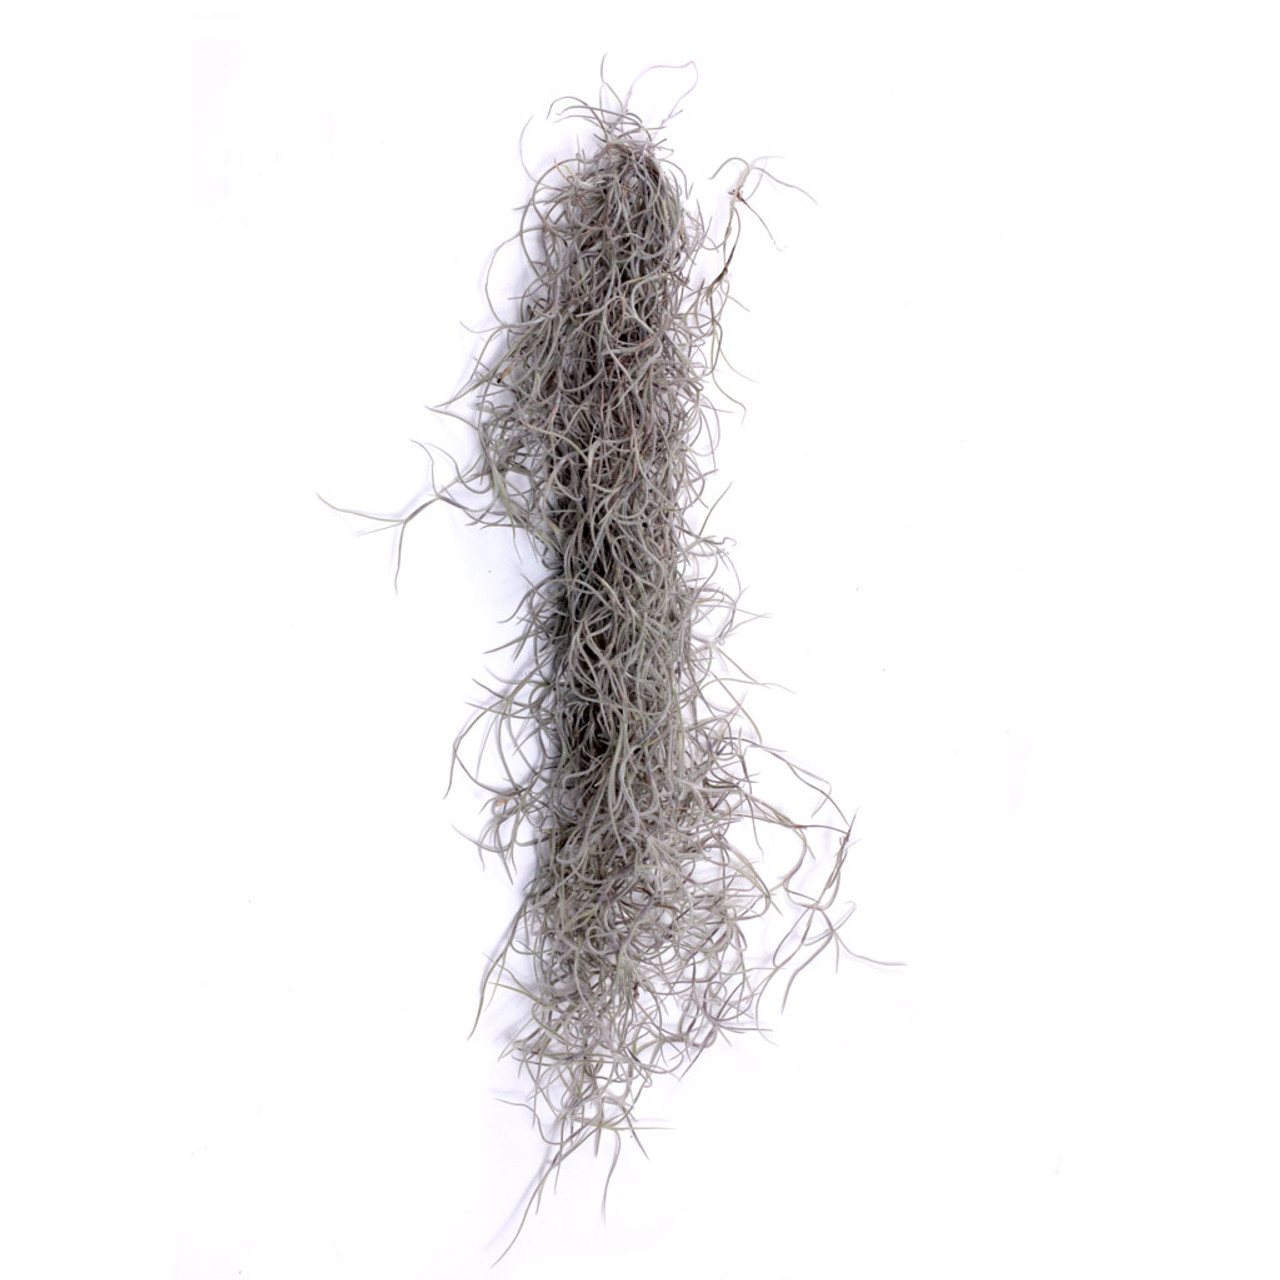 Spanish Moss ( Tillandsia Usneoides) Indoor Airplants at Rs 299.00